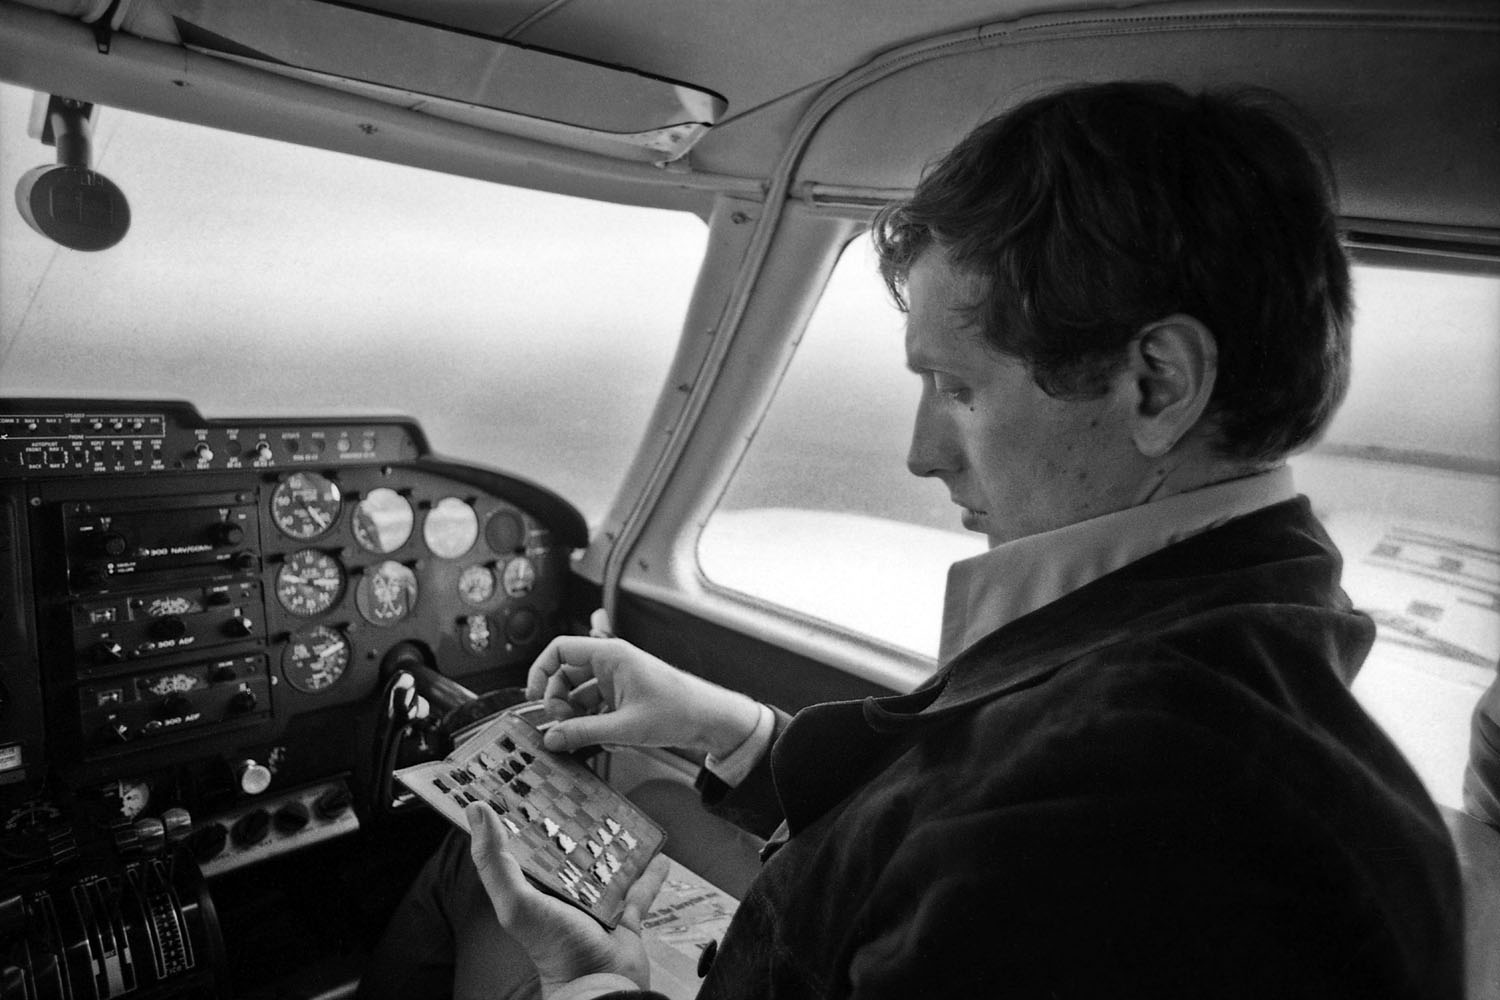 Fischer practices aboard a small plane, Argentina, 1971